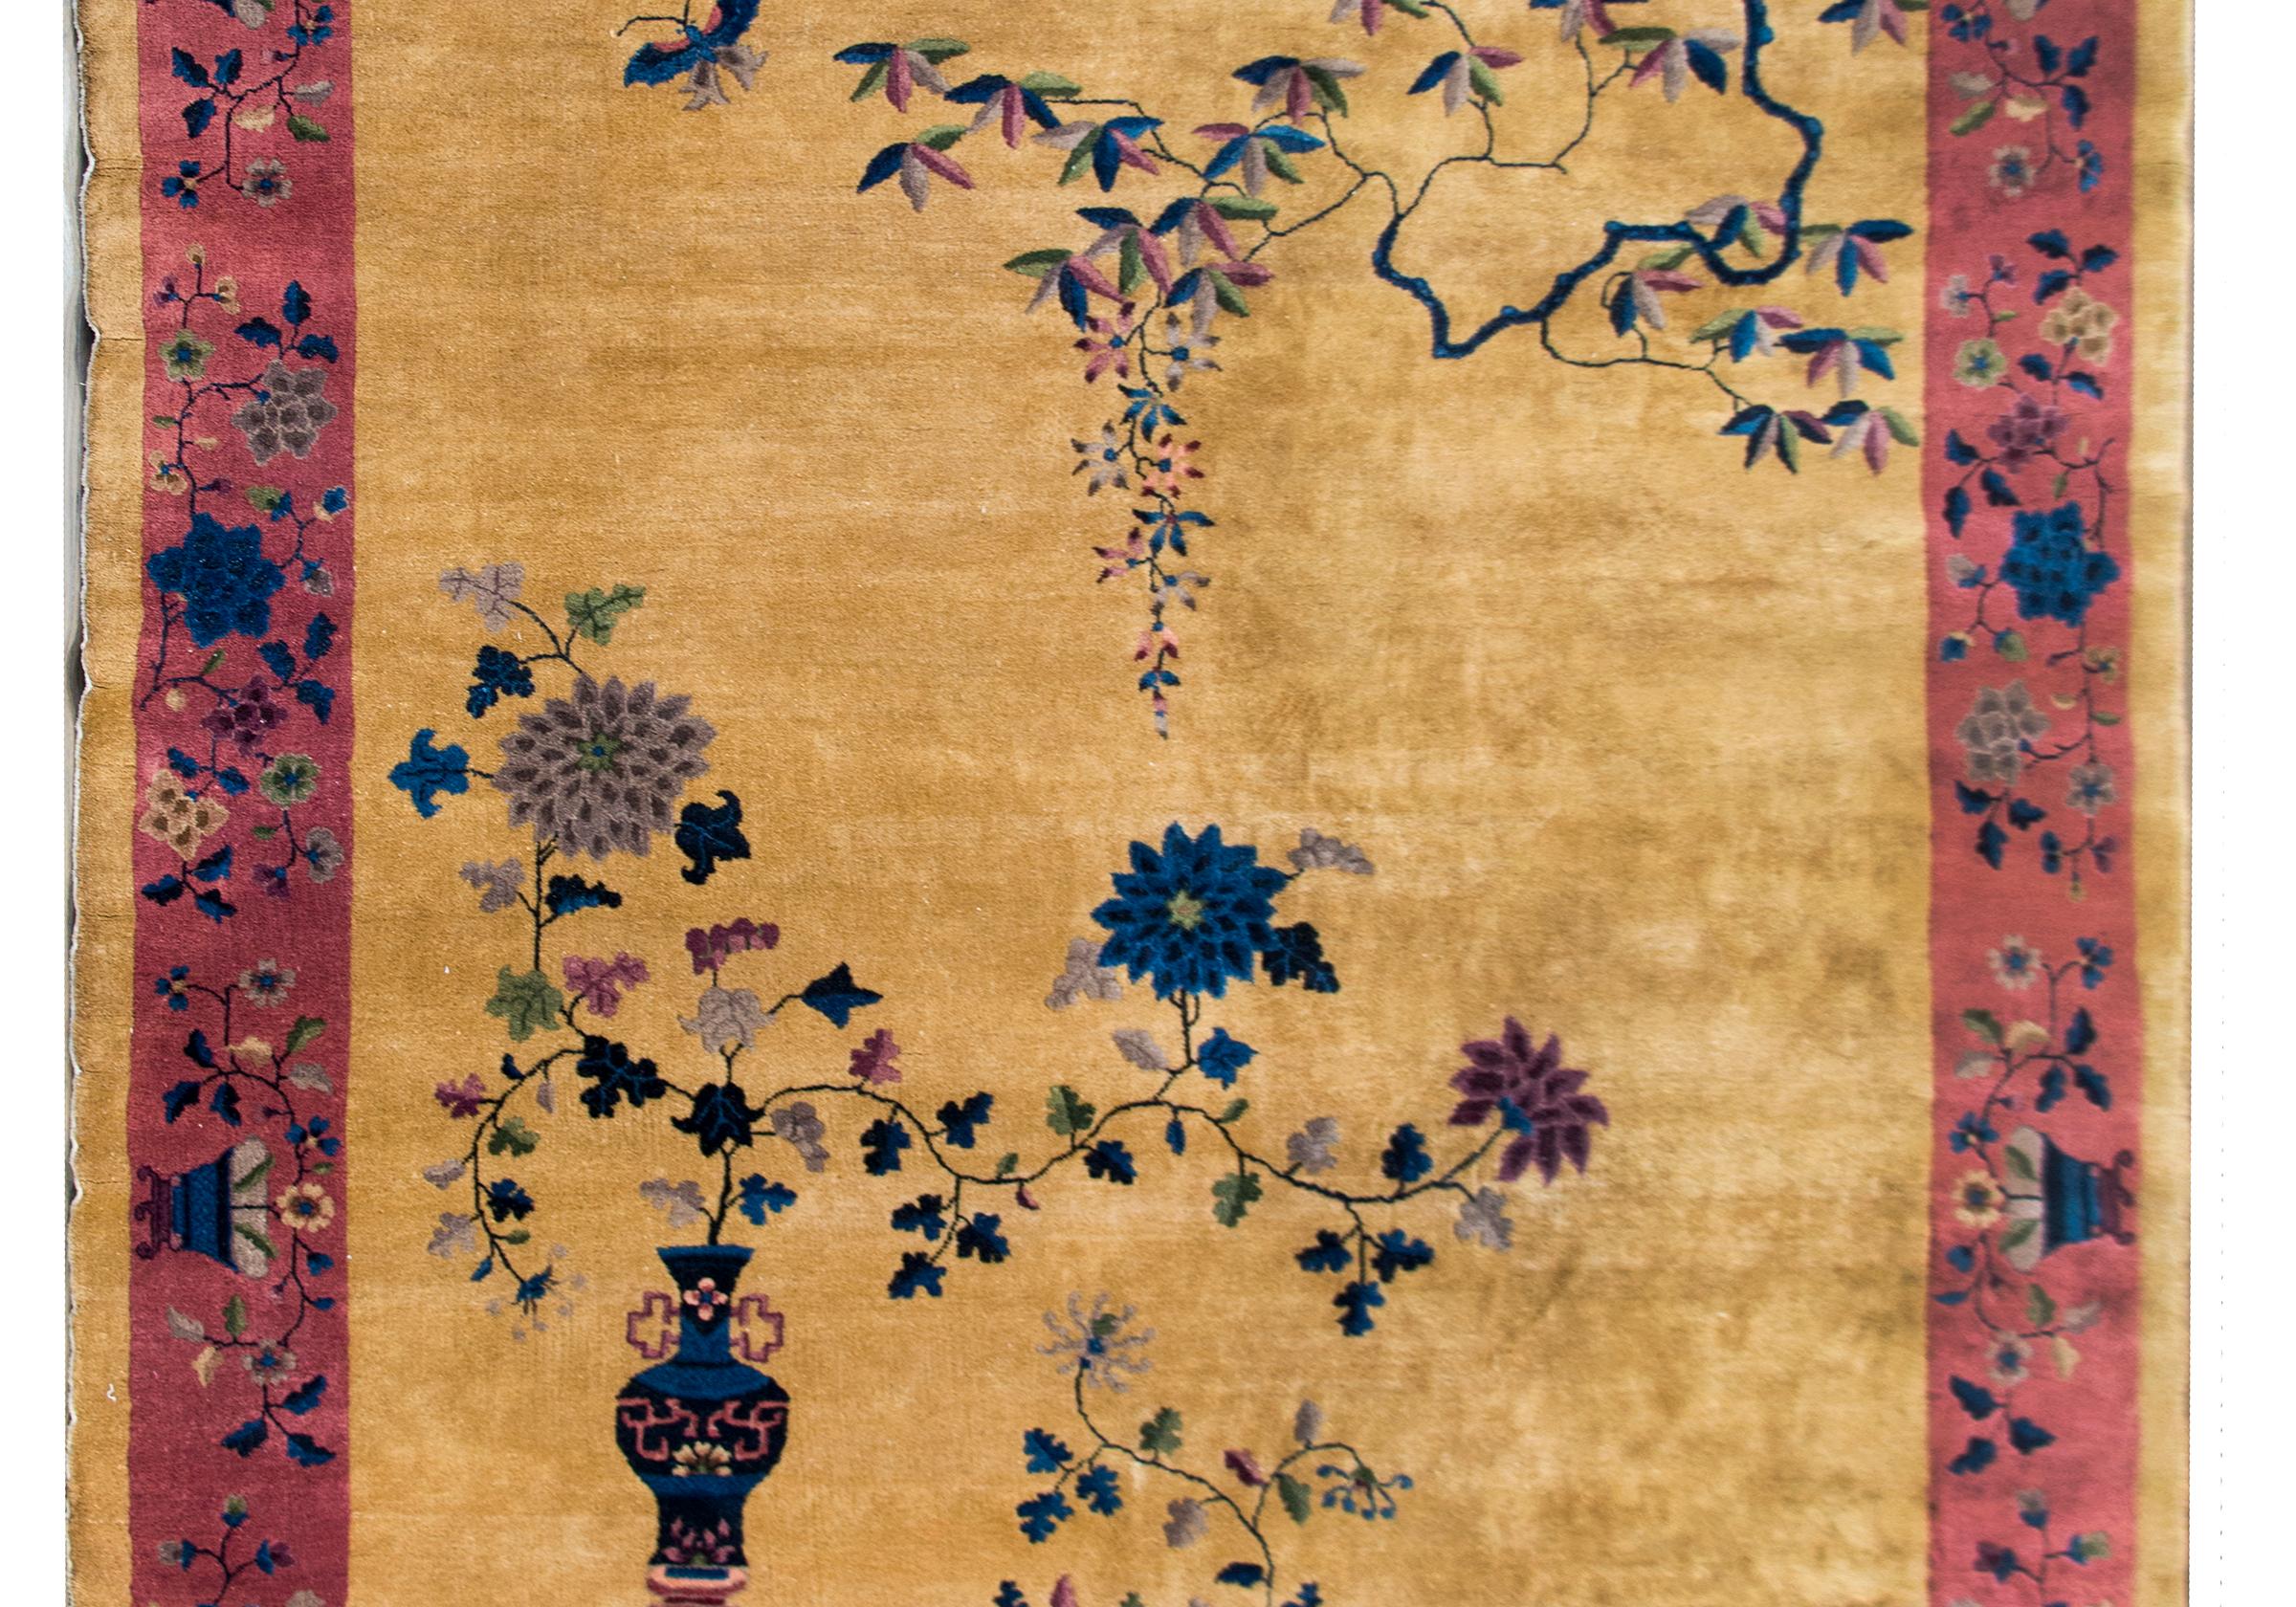 A wonderful early 20th century Chinese Art Deco rug with a rich gold field surrounded by a wide cranberry field and all overlaid with myriad auspicious flowers including chrysanthemums, peonies, cherry blossoms, and gnarly hysteria vines, all woven